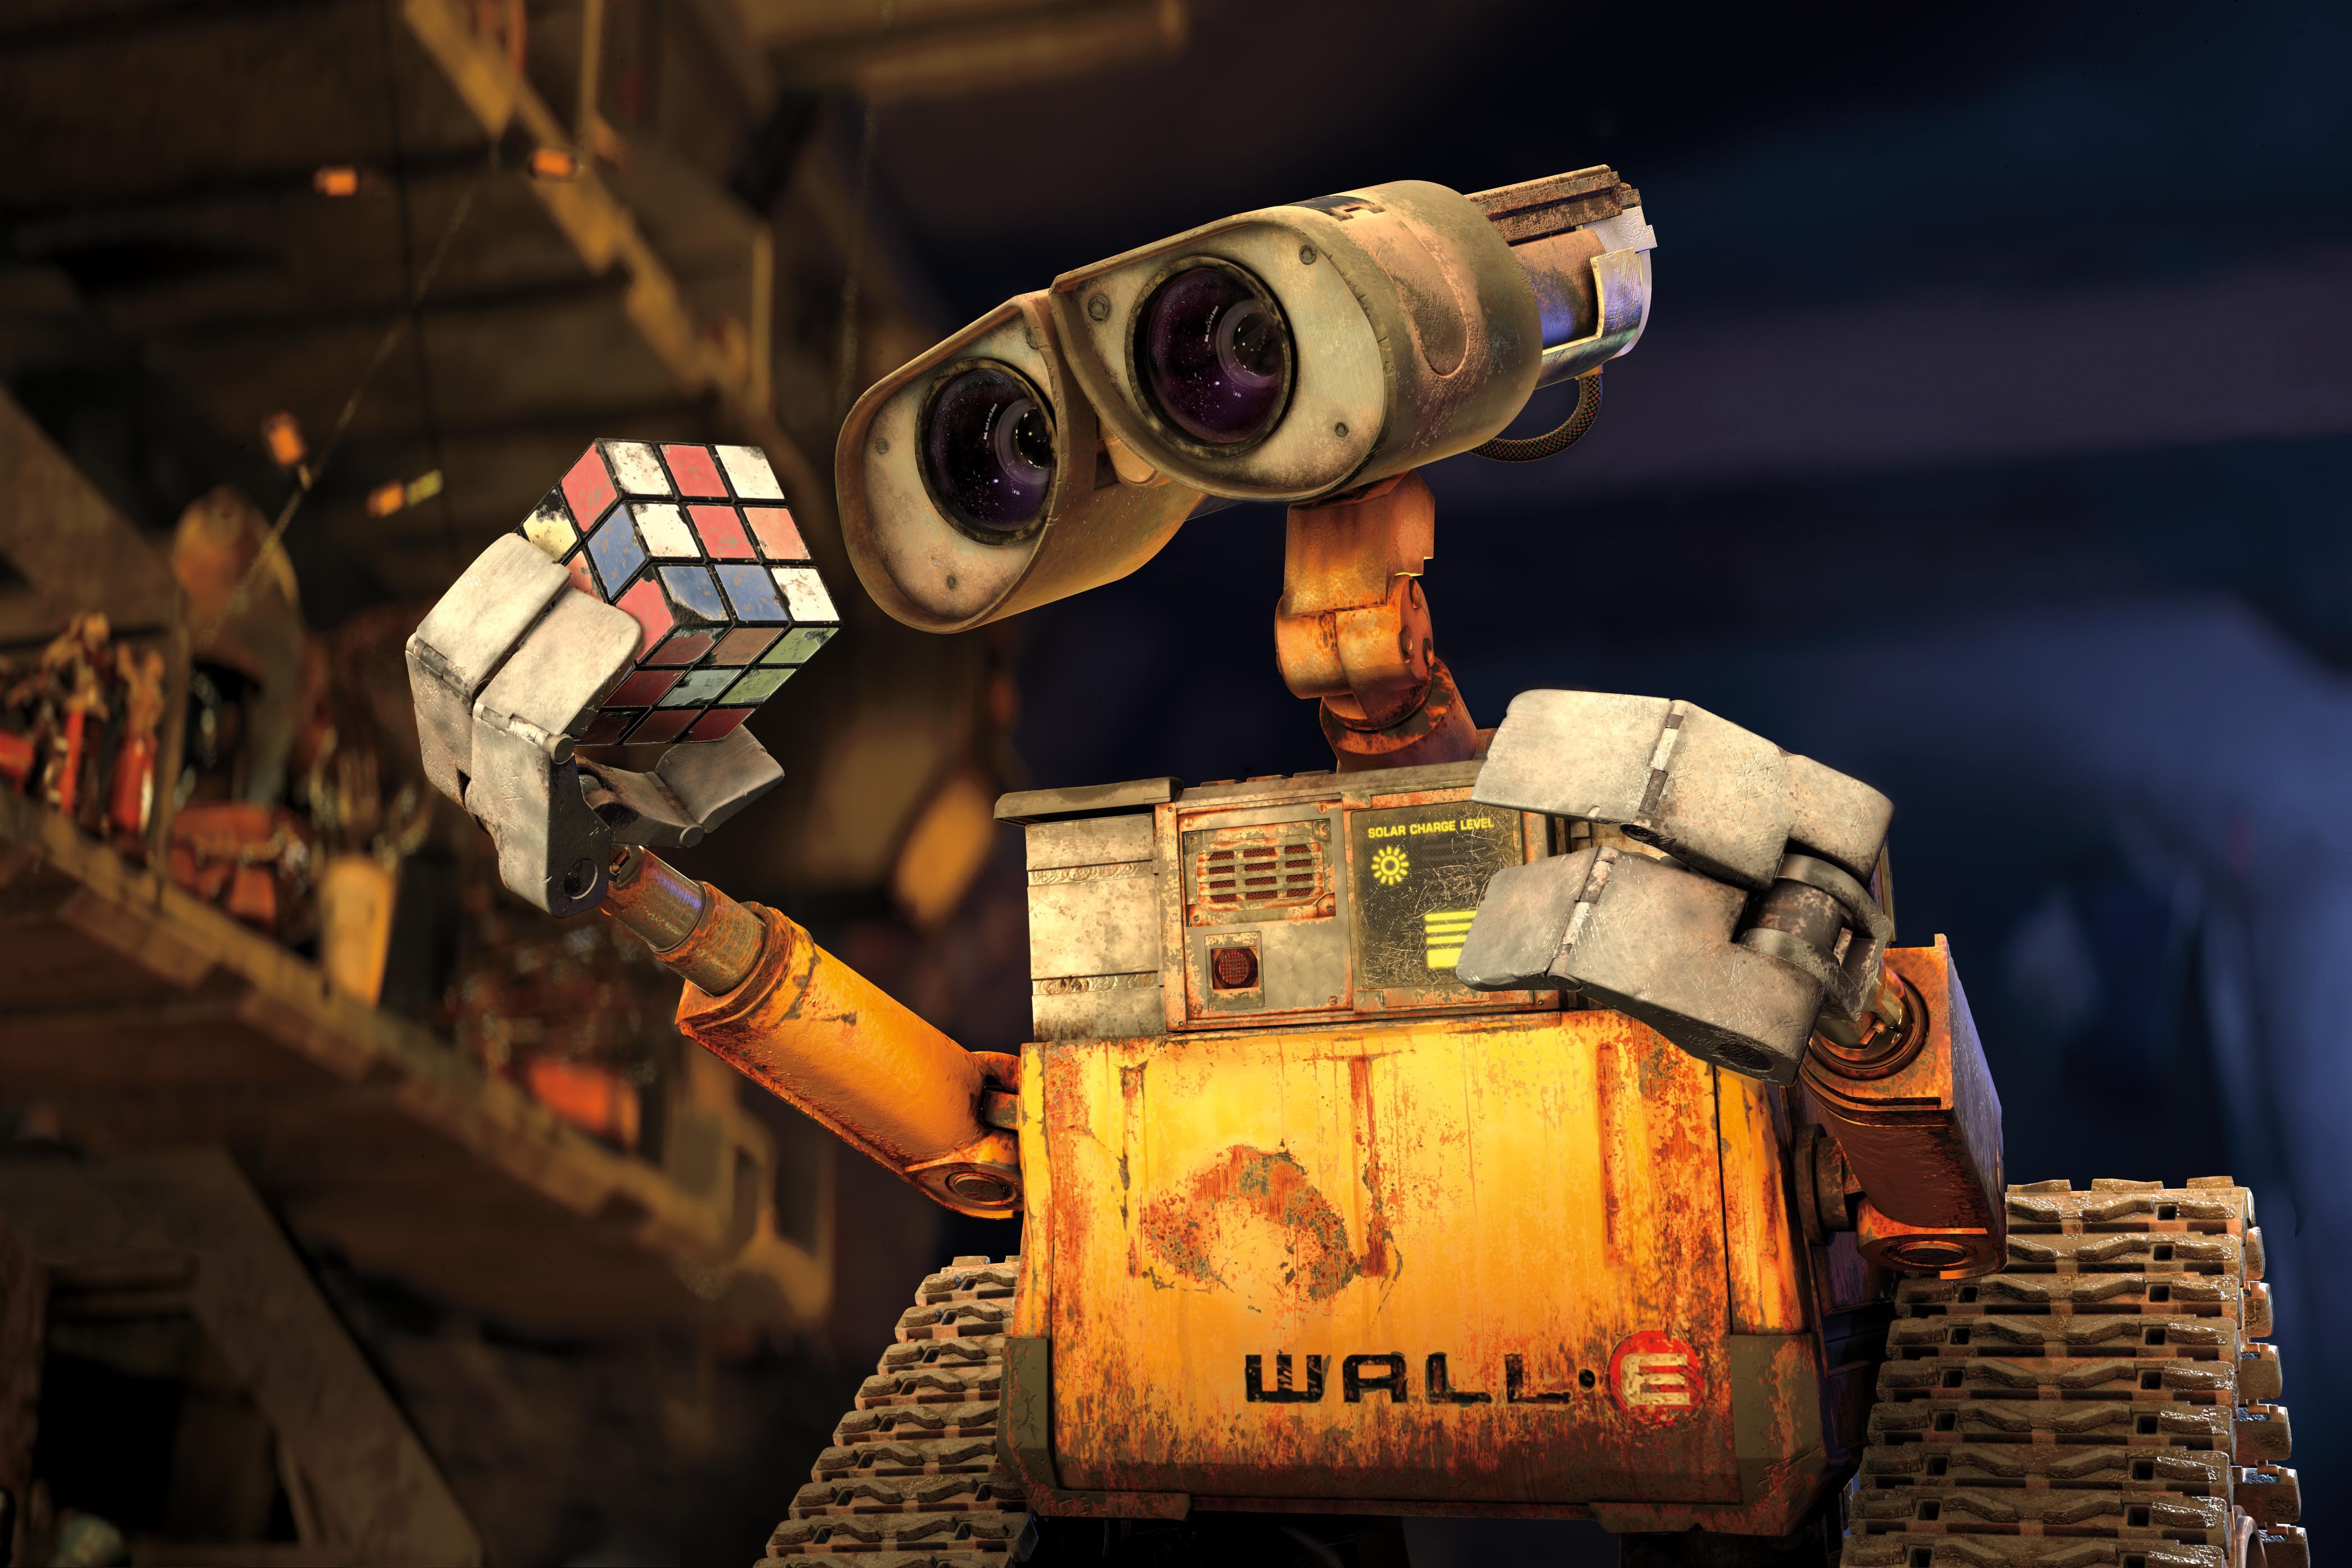 Wall-e holding a Rubik's cube, a character from Wall-E film.